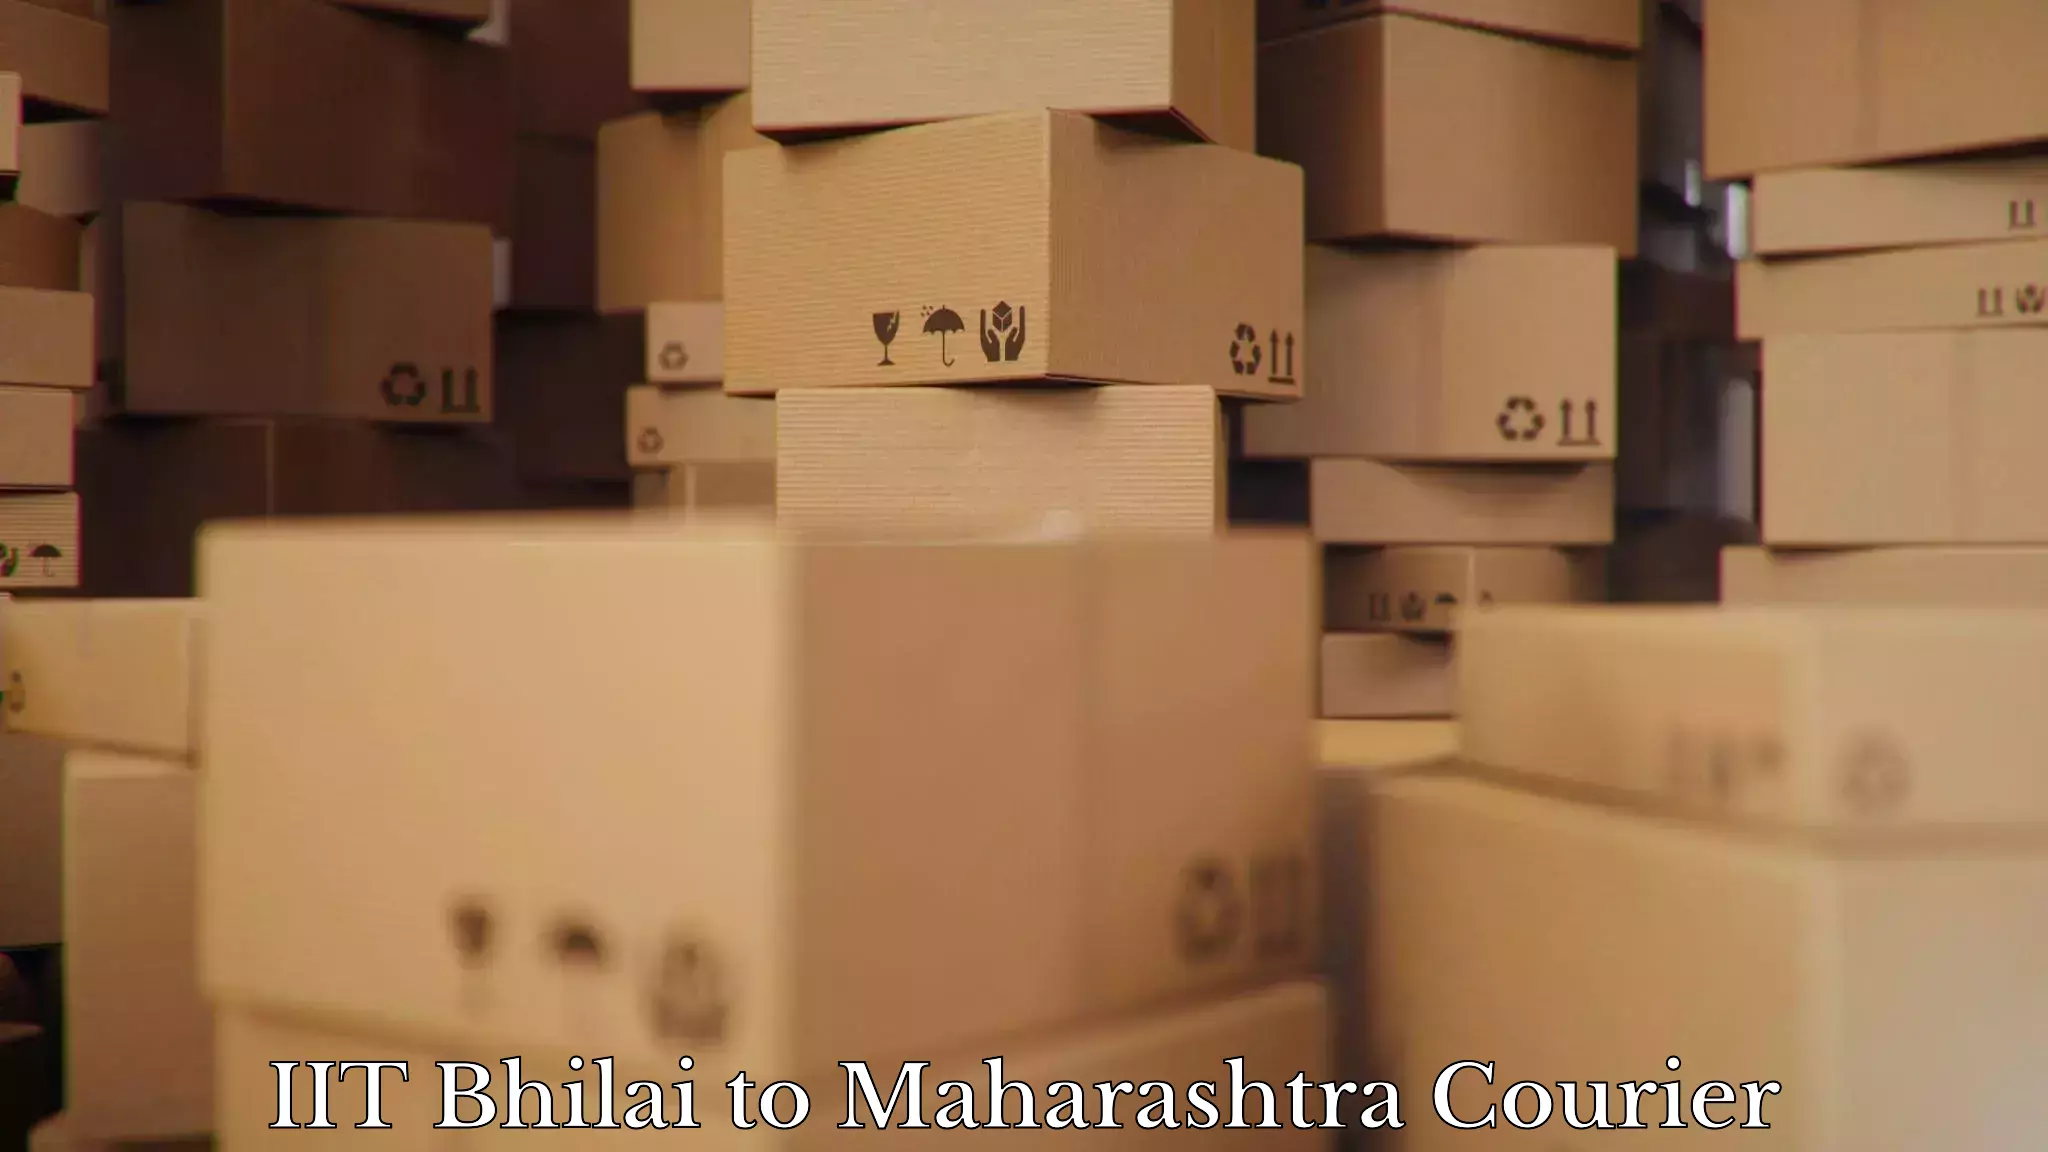 Expert moving and storage IIT Bhilai to Osmanabad